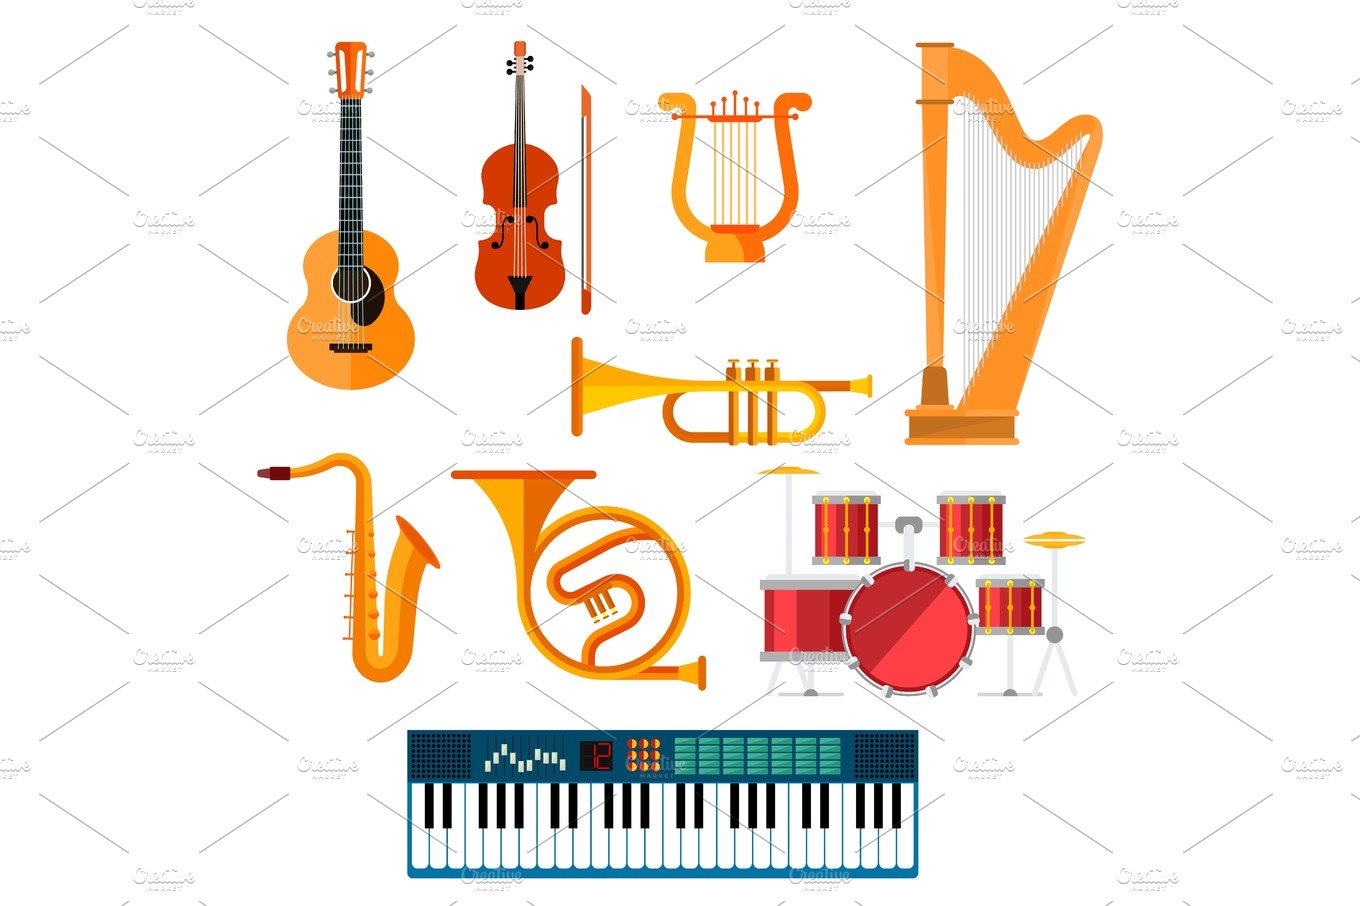 Musical wind, key or string vector instruments cover image.